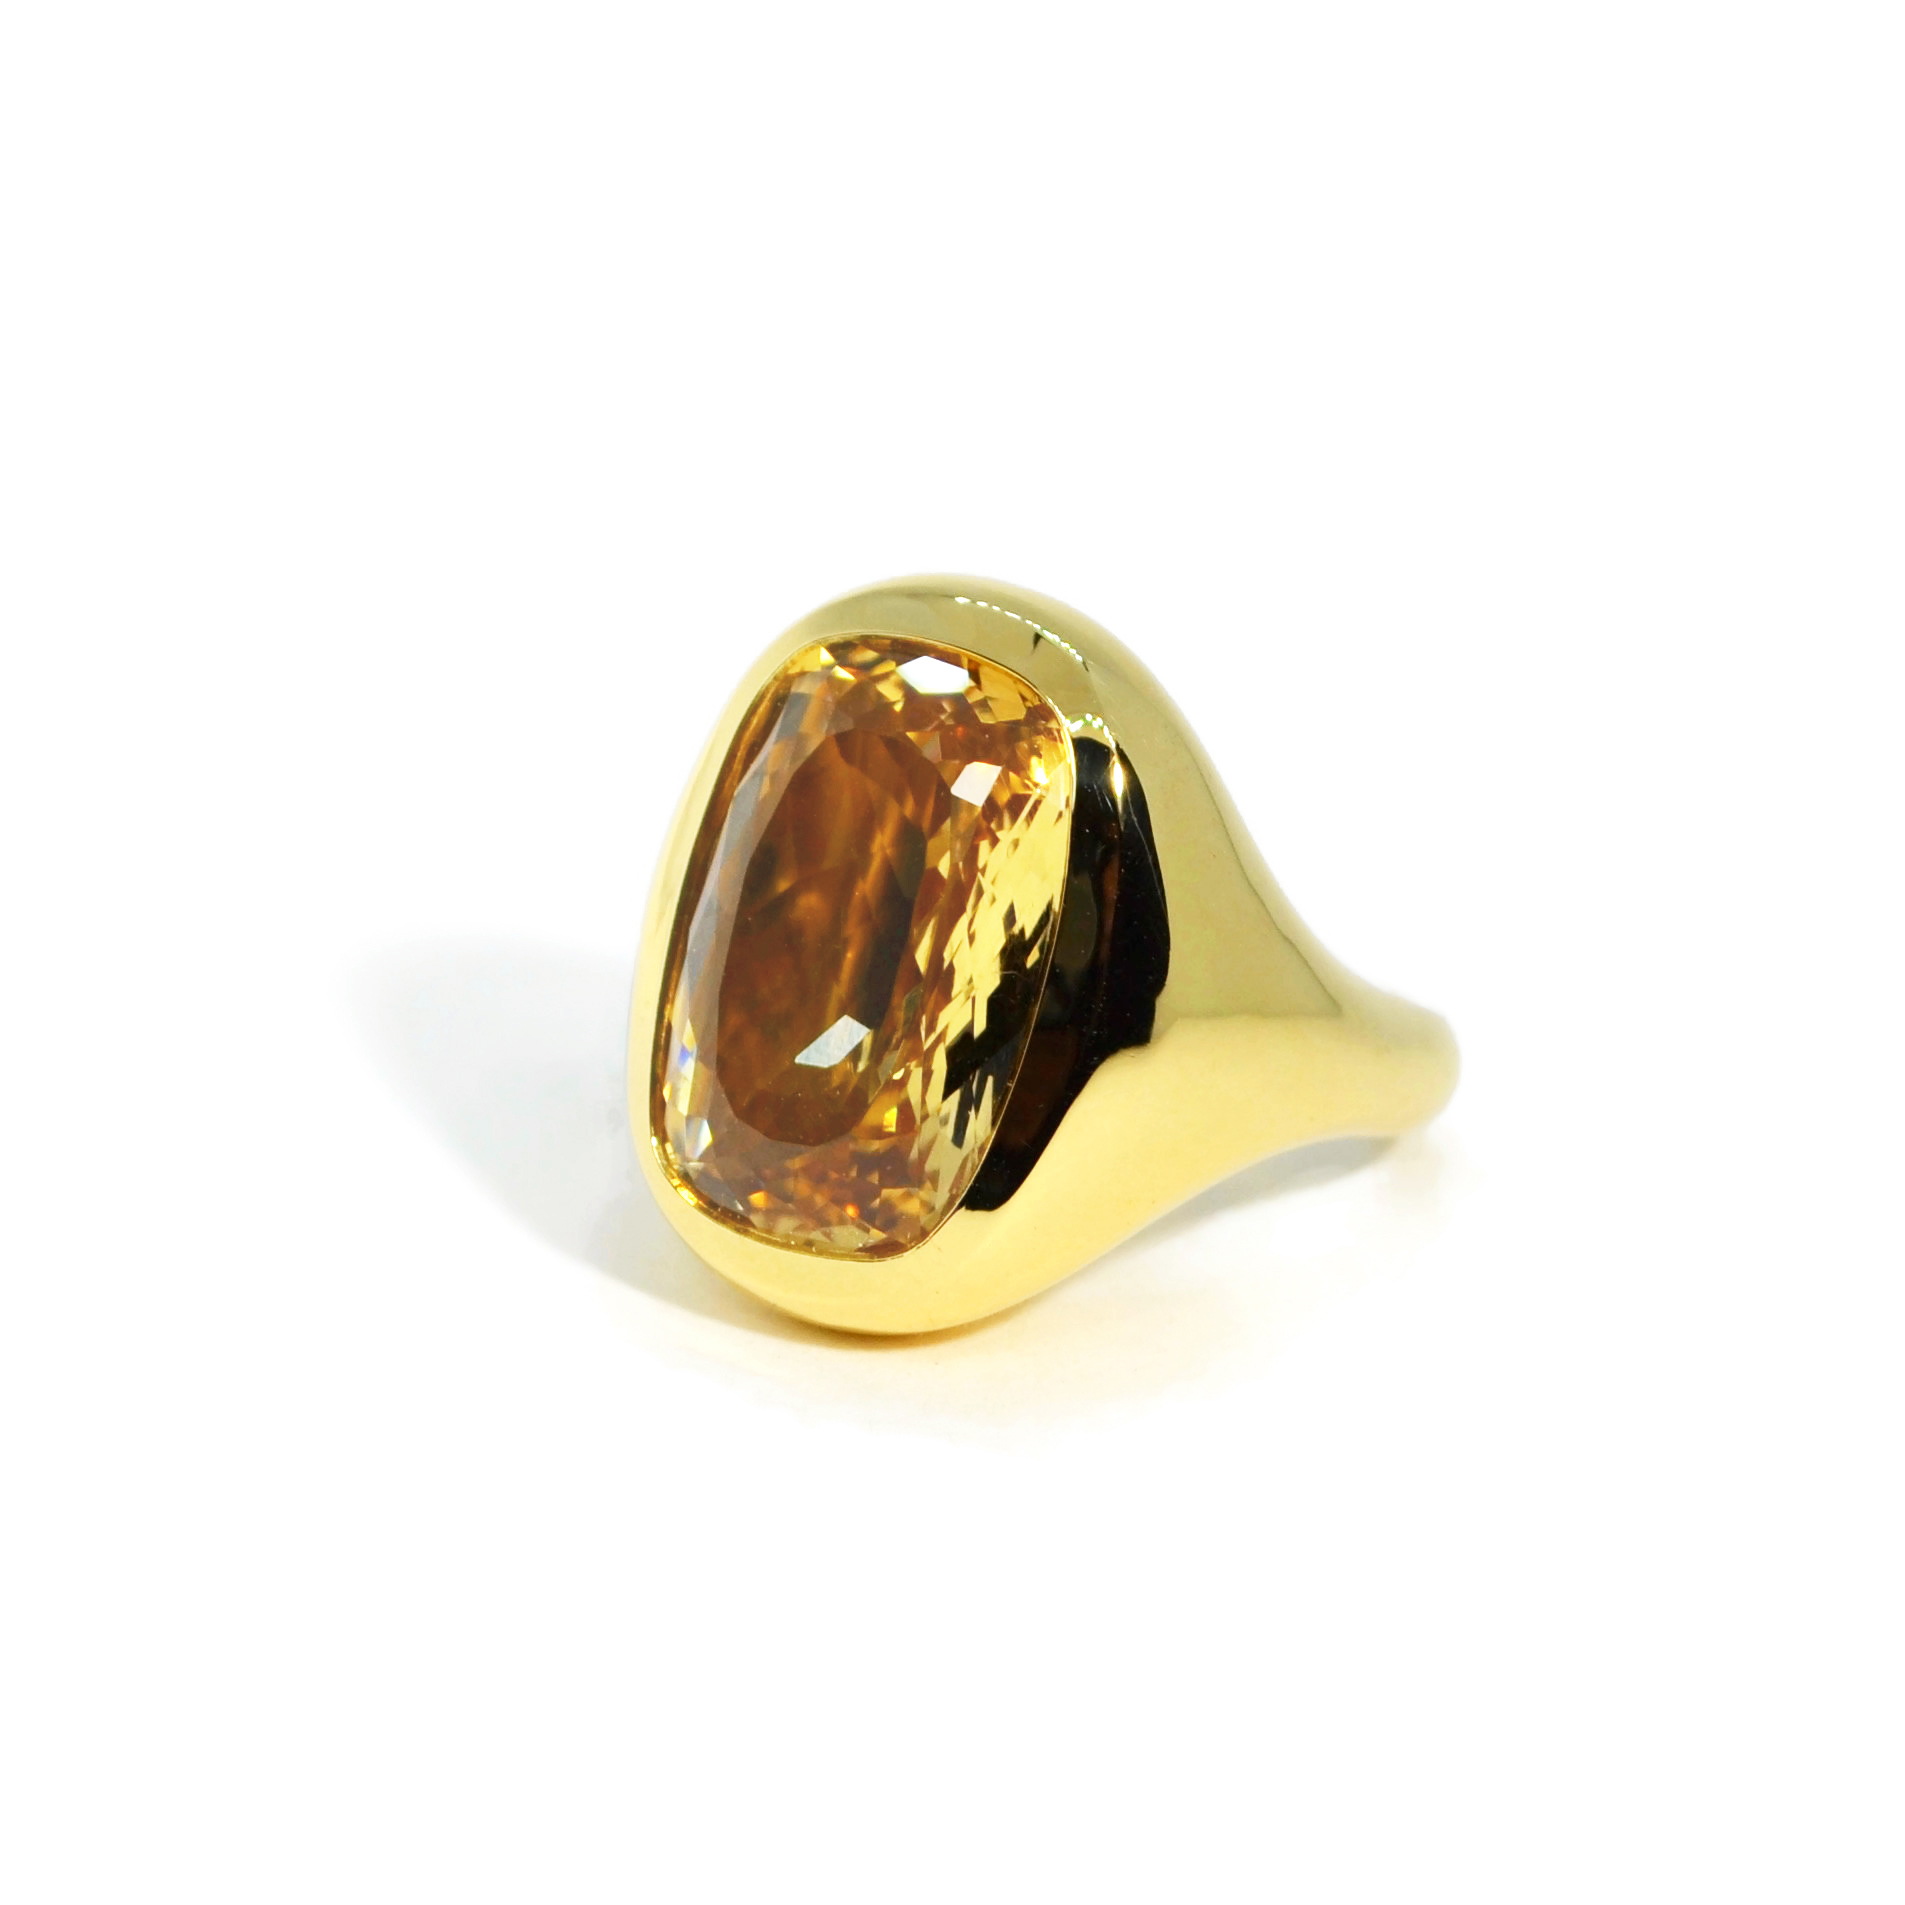 A & Furst 18k Yellow Gold Oval Citrine Ring